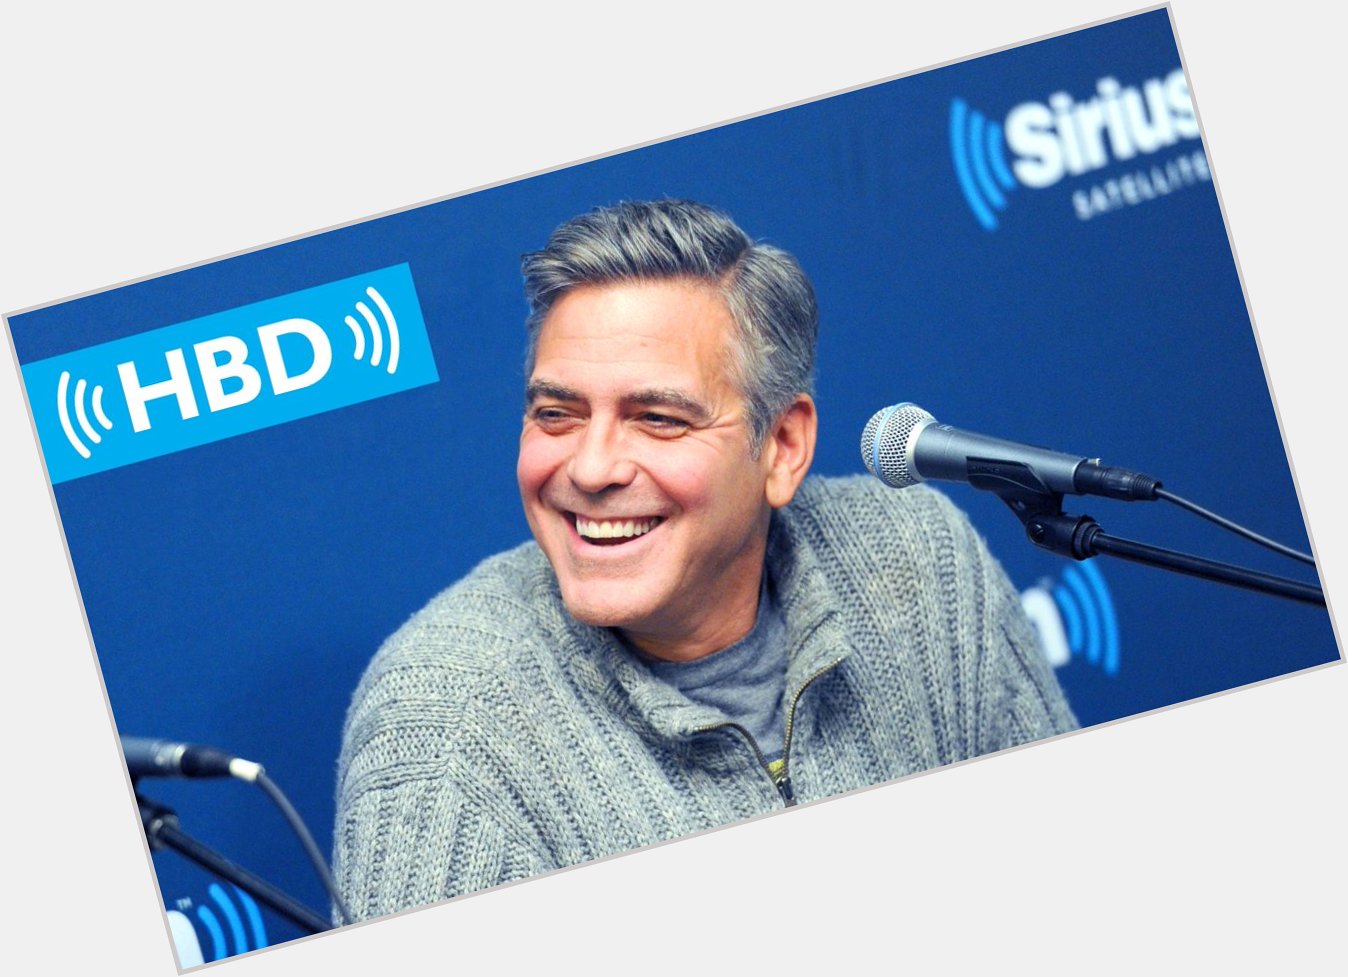 We like to imagine he\s grinning at us... Happy birthday, George Clooney! 